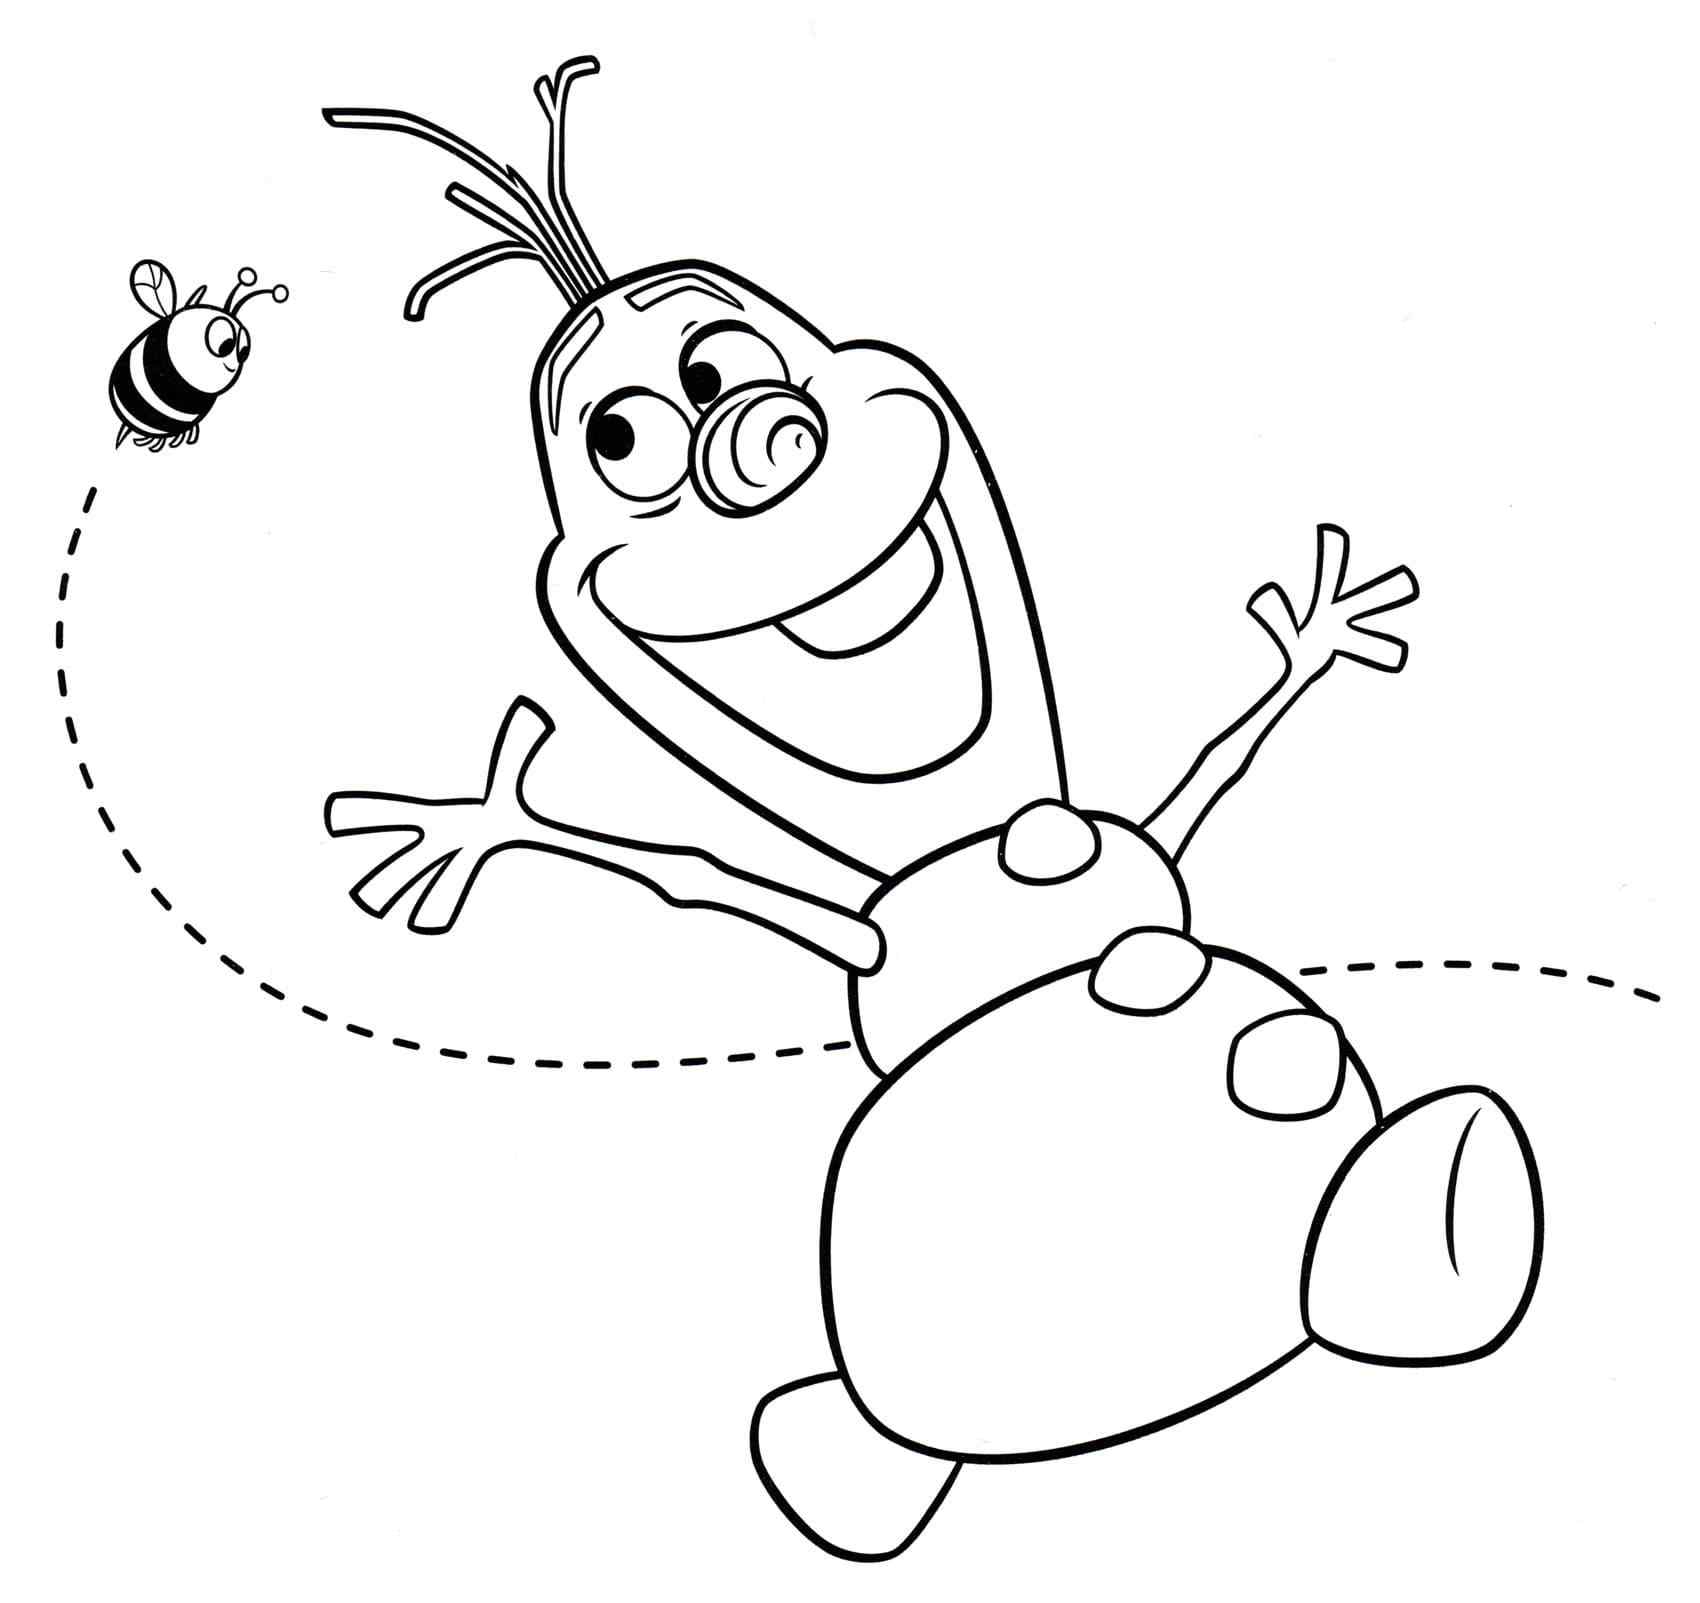 Snowman Playing With A Bee Coloring Page